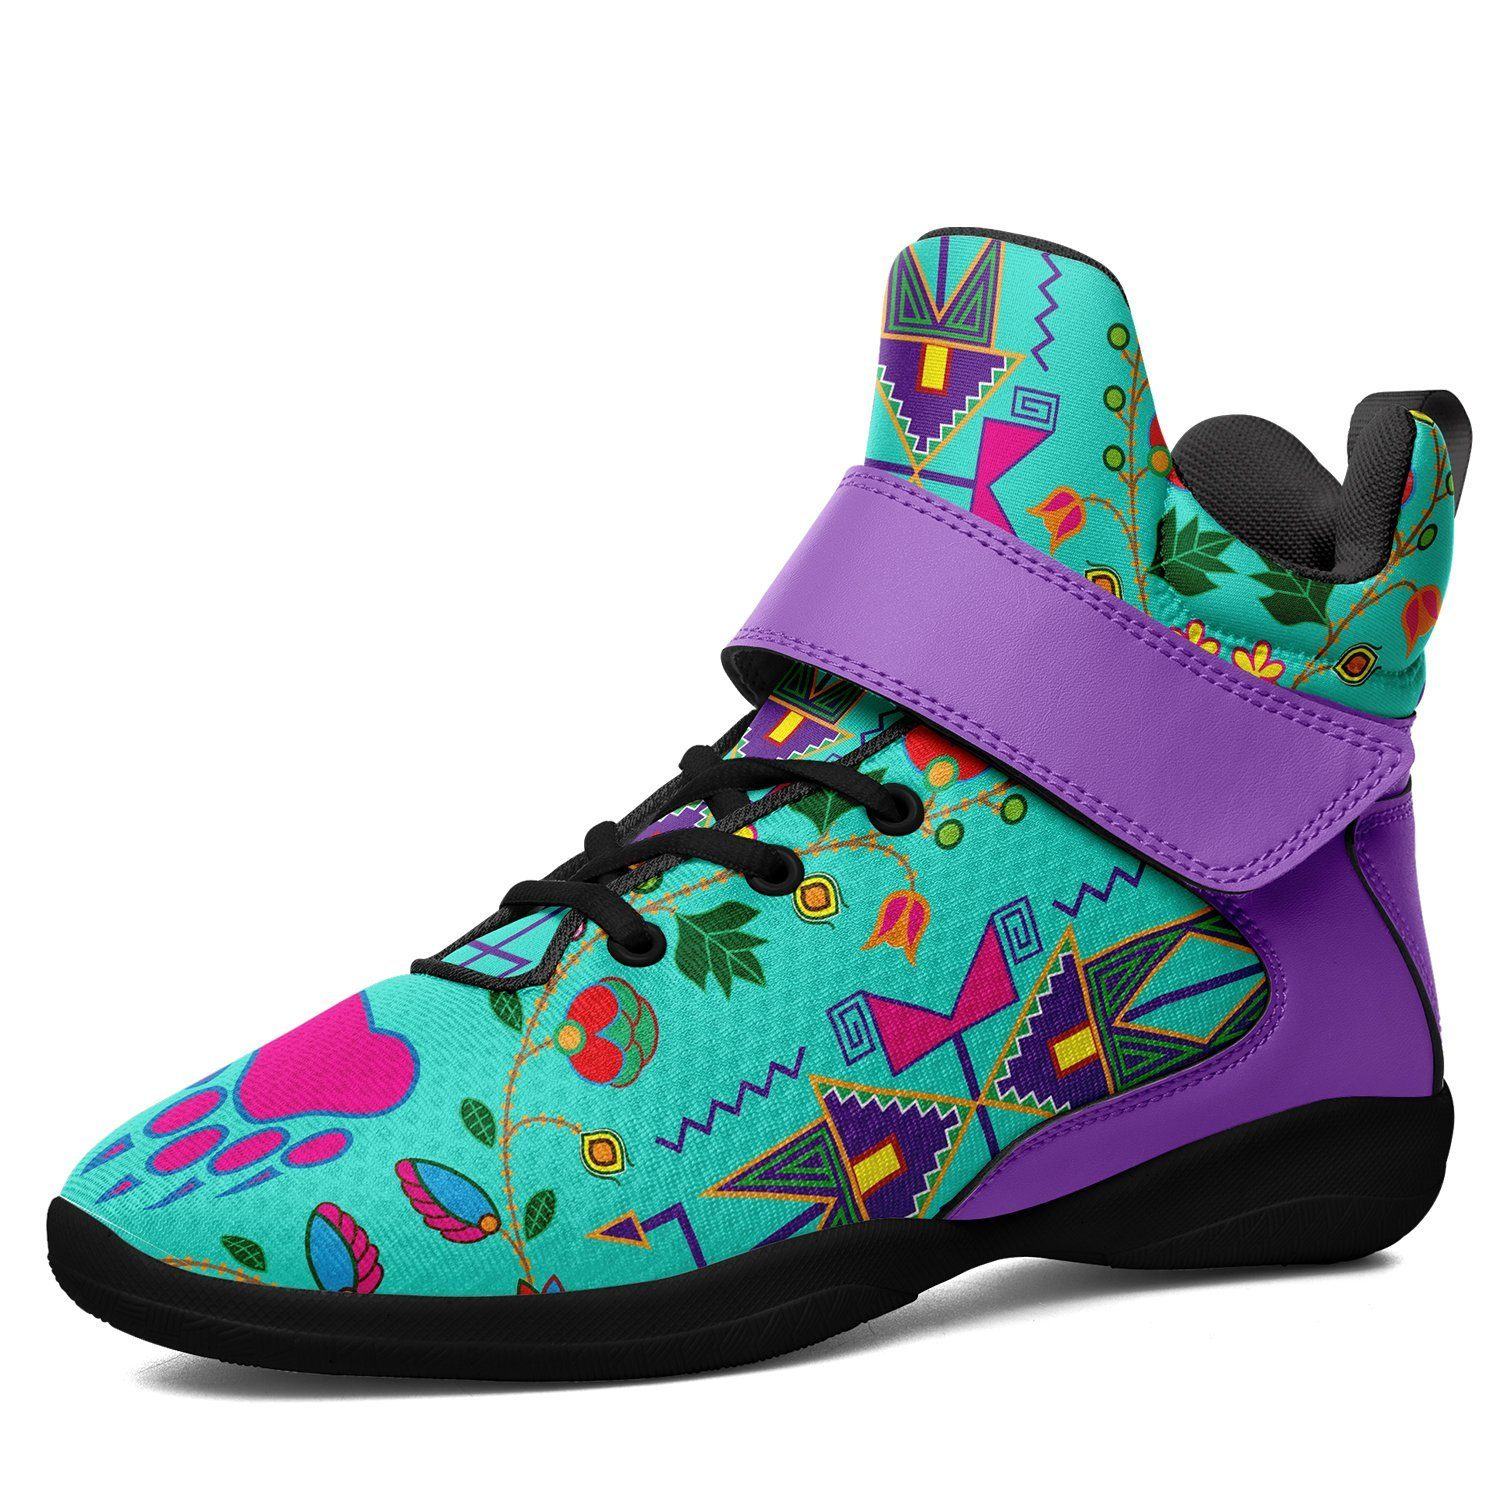 Geometric Floral Fall Sky Kid's Ipottaa Basketball / Sport High Top Shoes 49 Dzine US Women 4.5 / US Youth 3.5 / EUR 35 Black Sole with Lavender Strap 